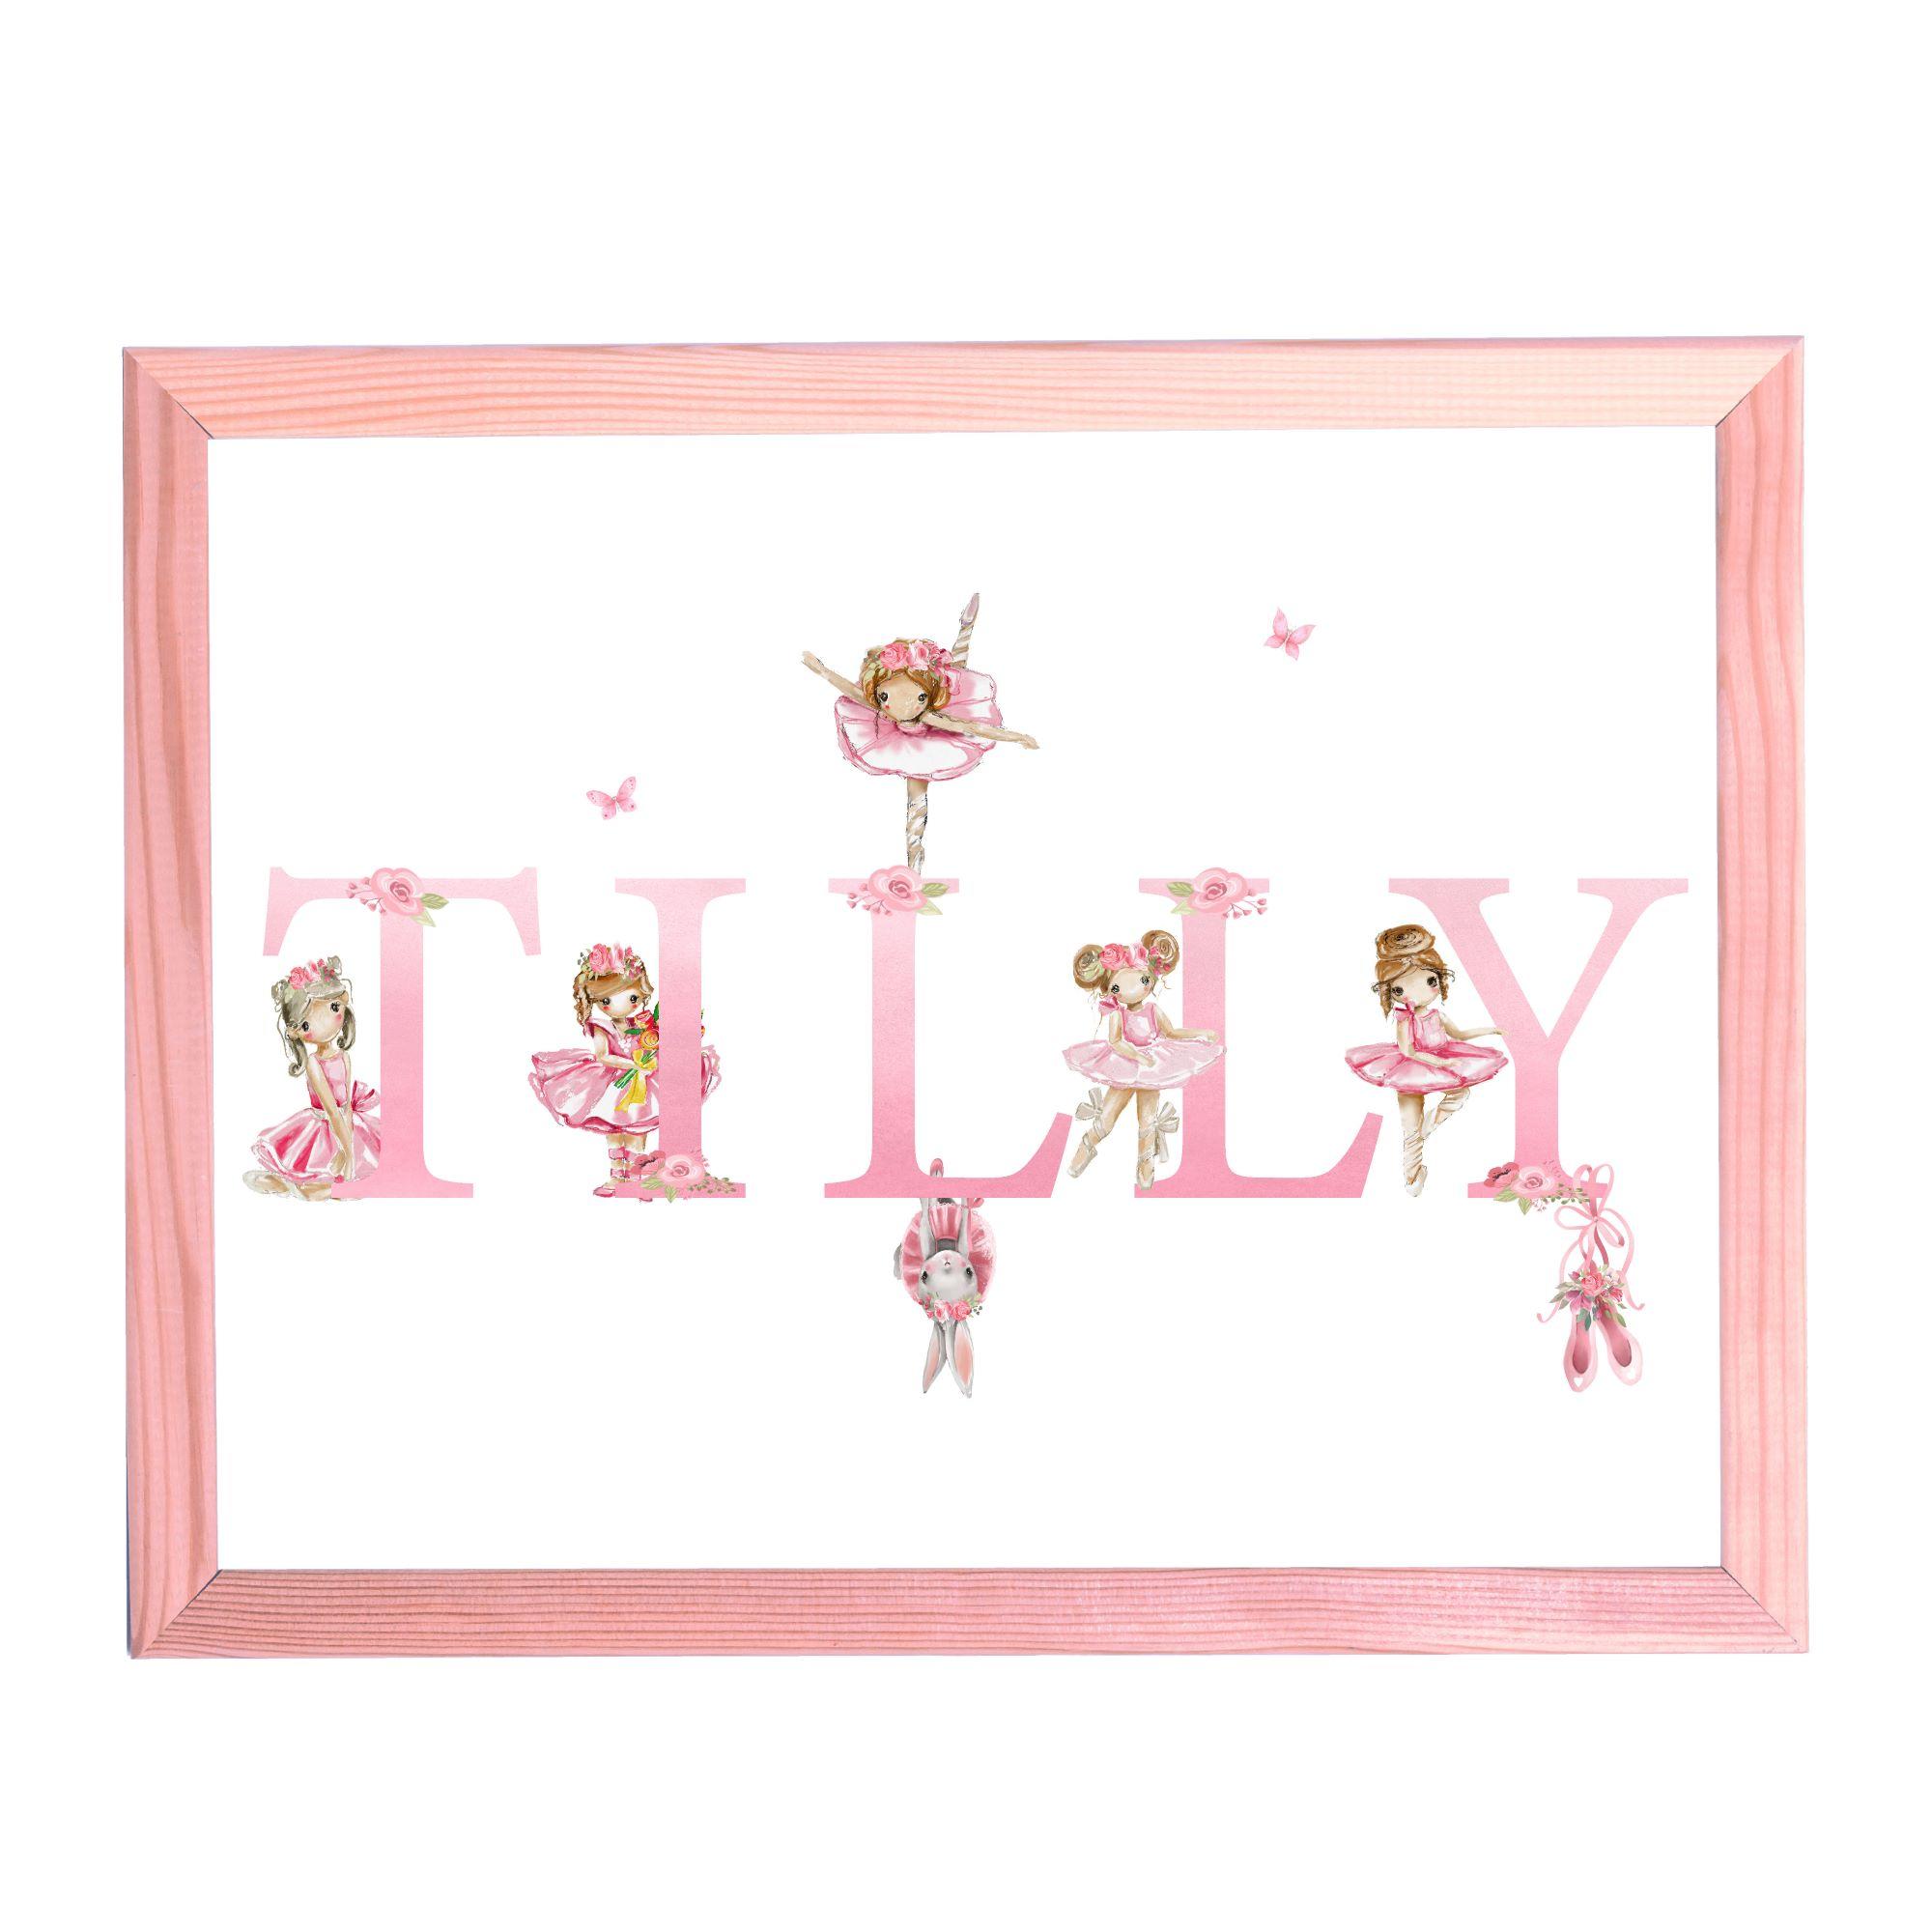 Personalised Ballet Print, Perfect Gift for a Ballerina,Dancer,Ballet Themed Bedroom